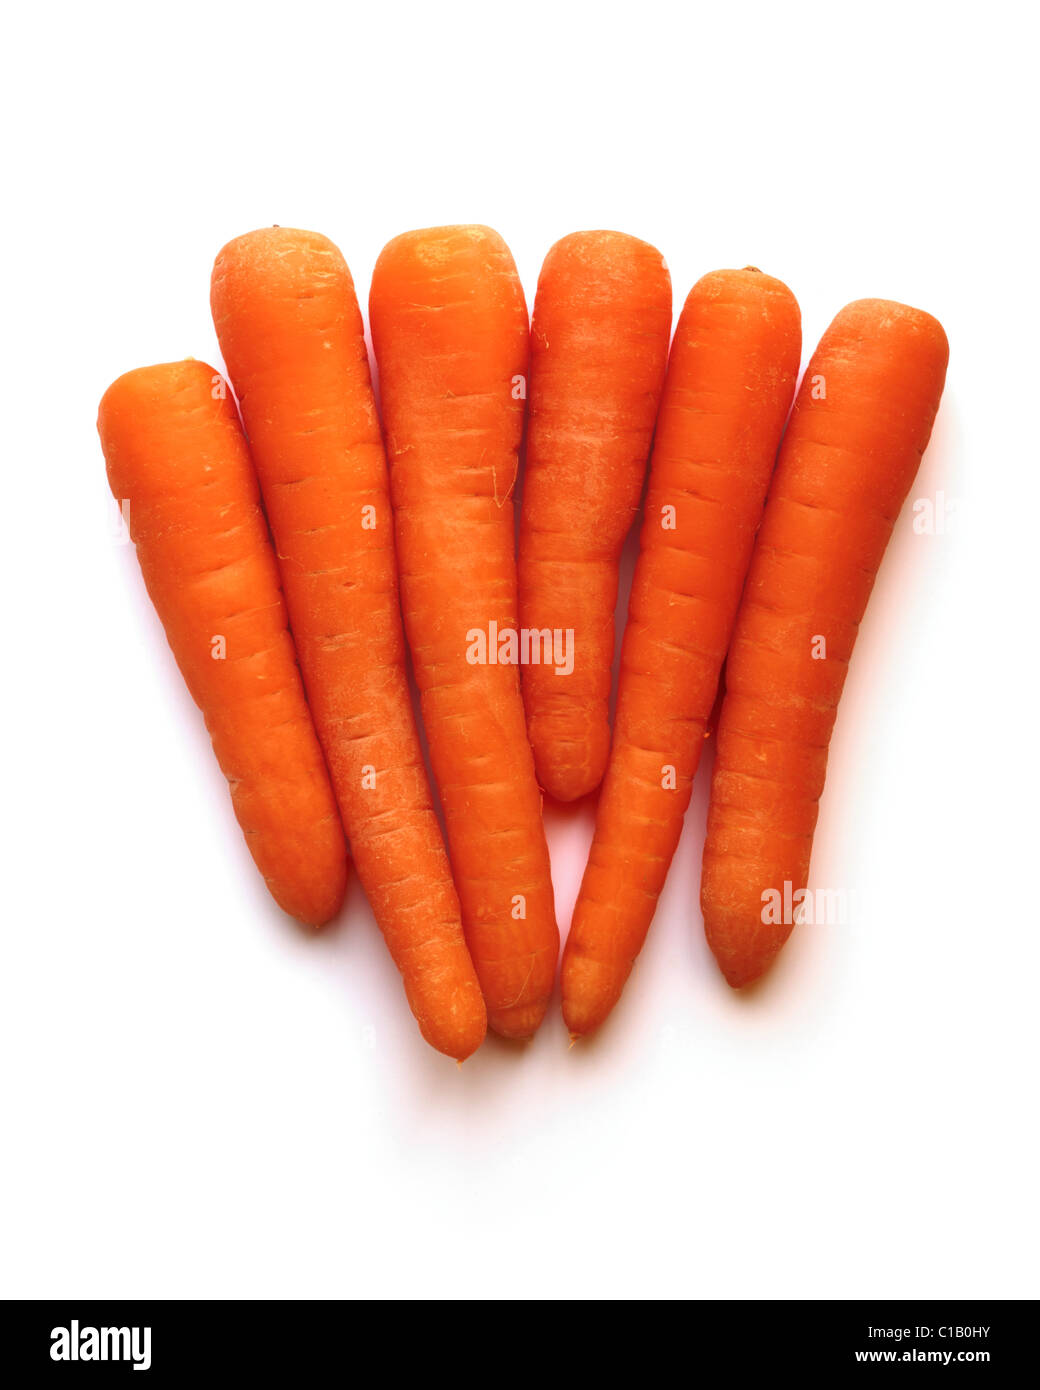 Carrots on a white background. Stock Photo